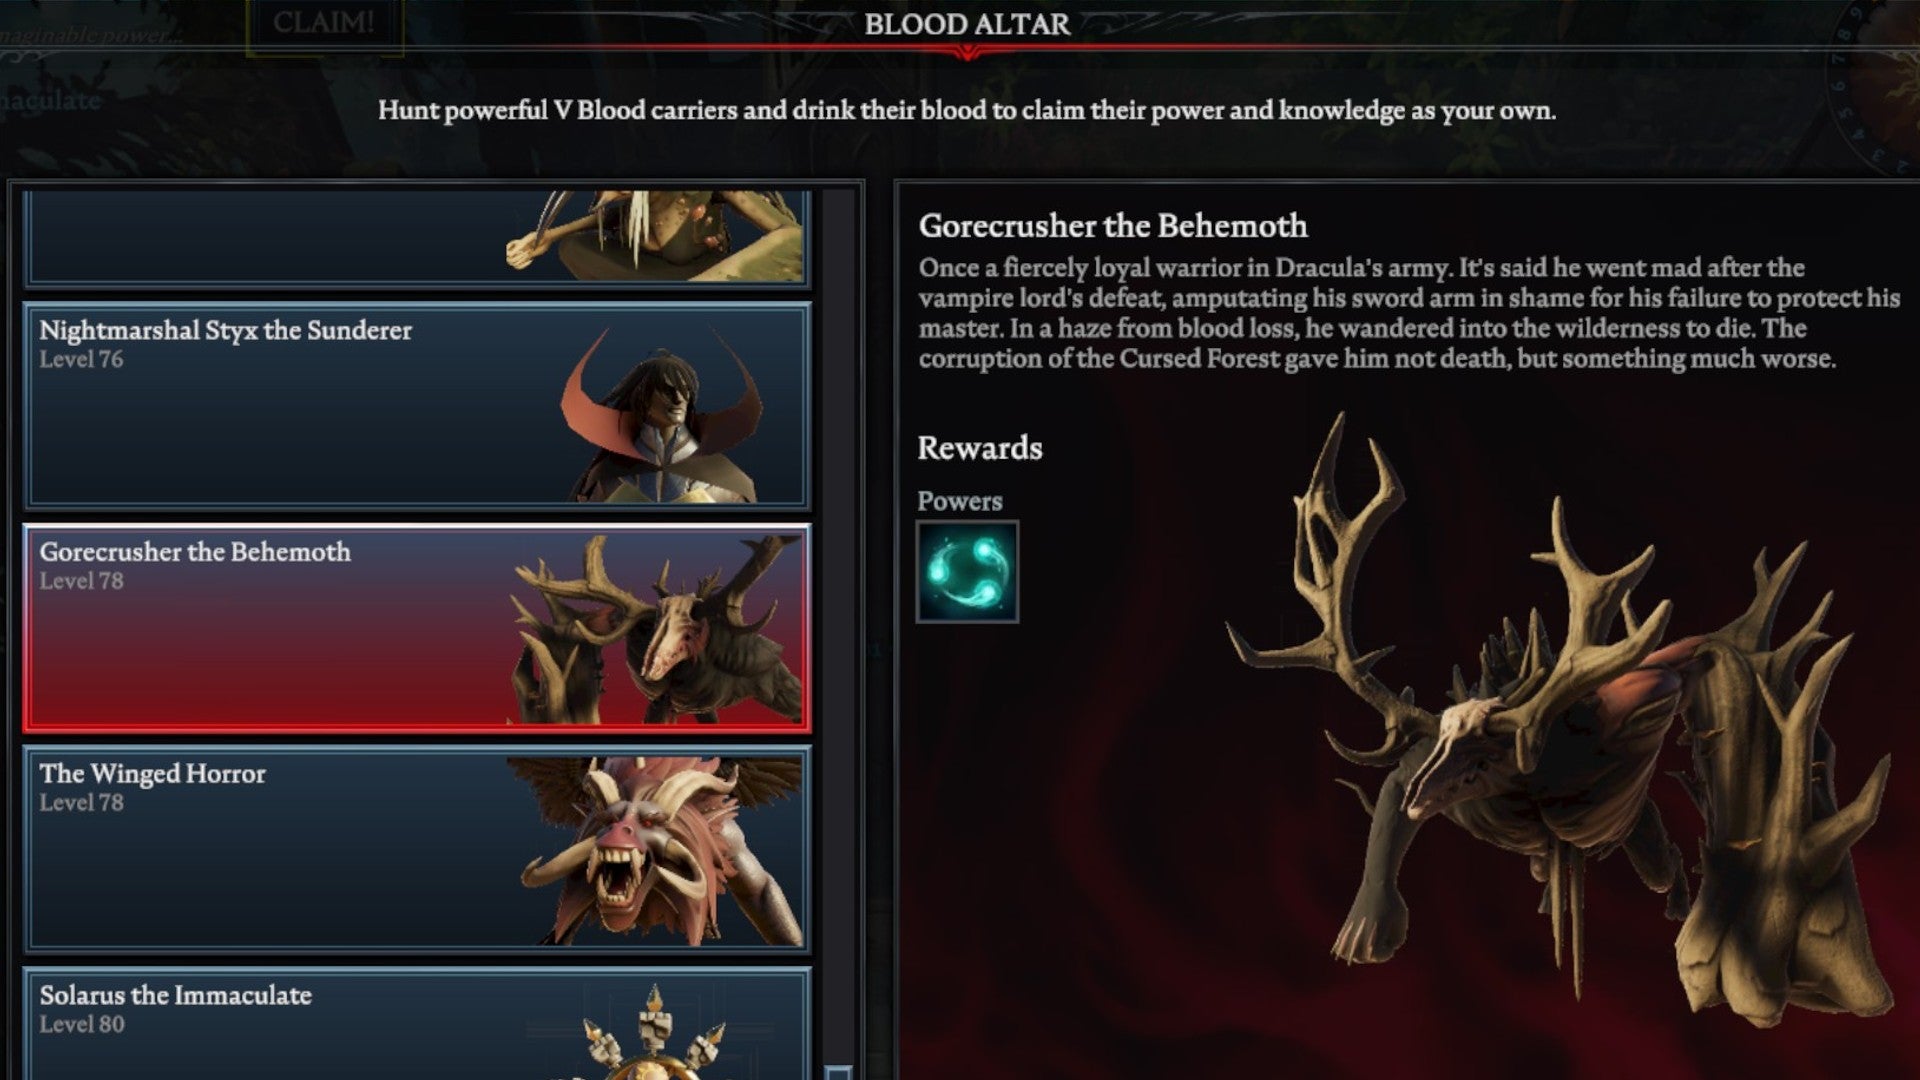 V Rising Gorecrusher the Behemoth Blood Altar tracking page, showing an image of a twisted tree with a deer head on the right and a list of bosses on the left